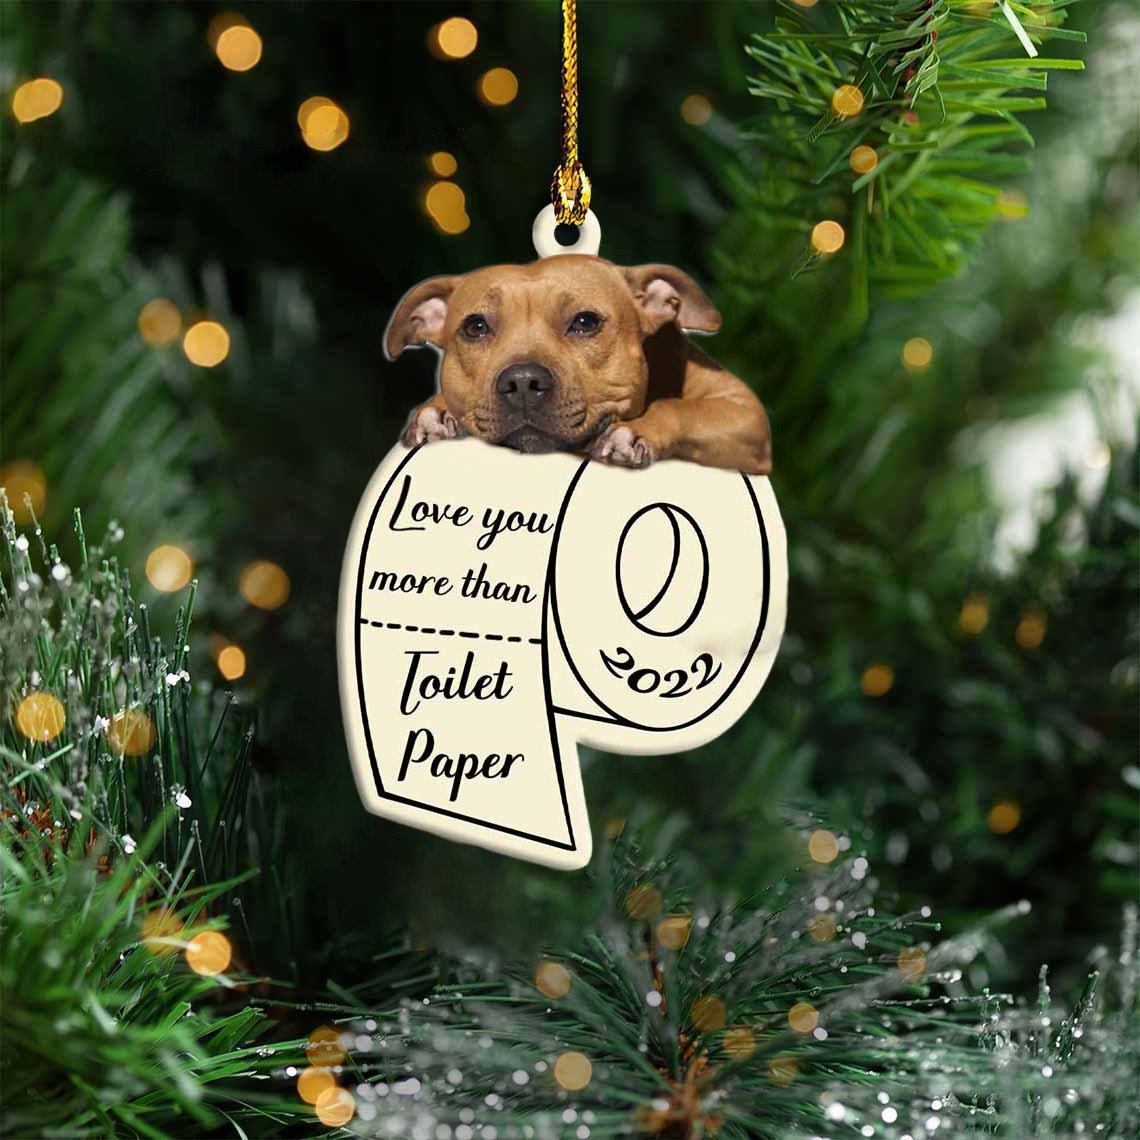 Staffordshire Bull Terrier Love You More Than Toilet Paper 2022 Hanging Ornament